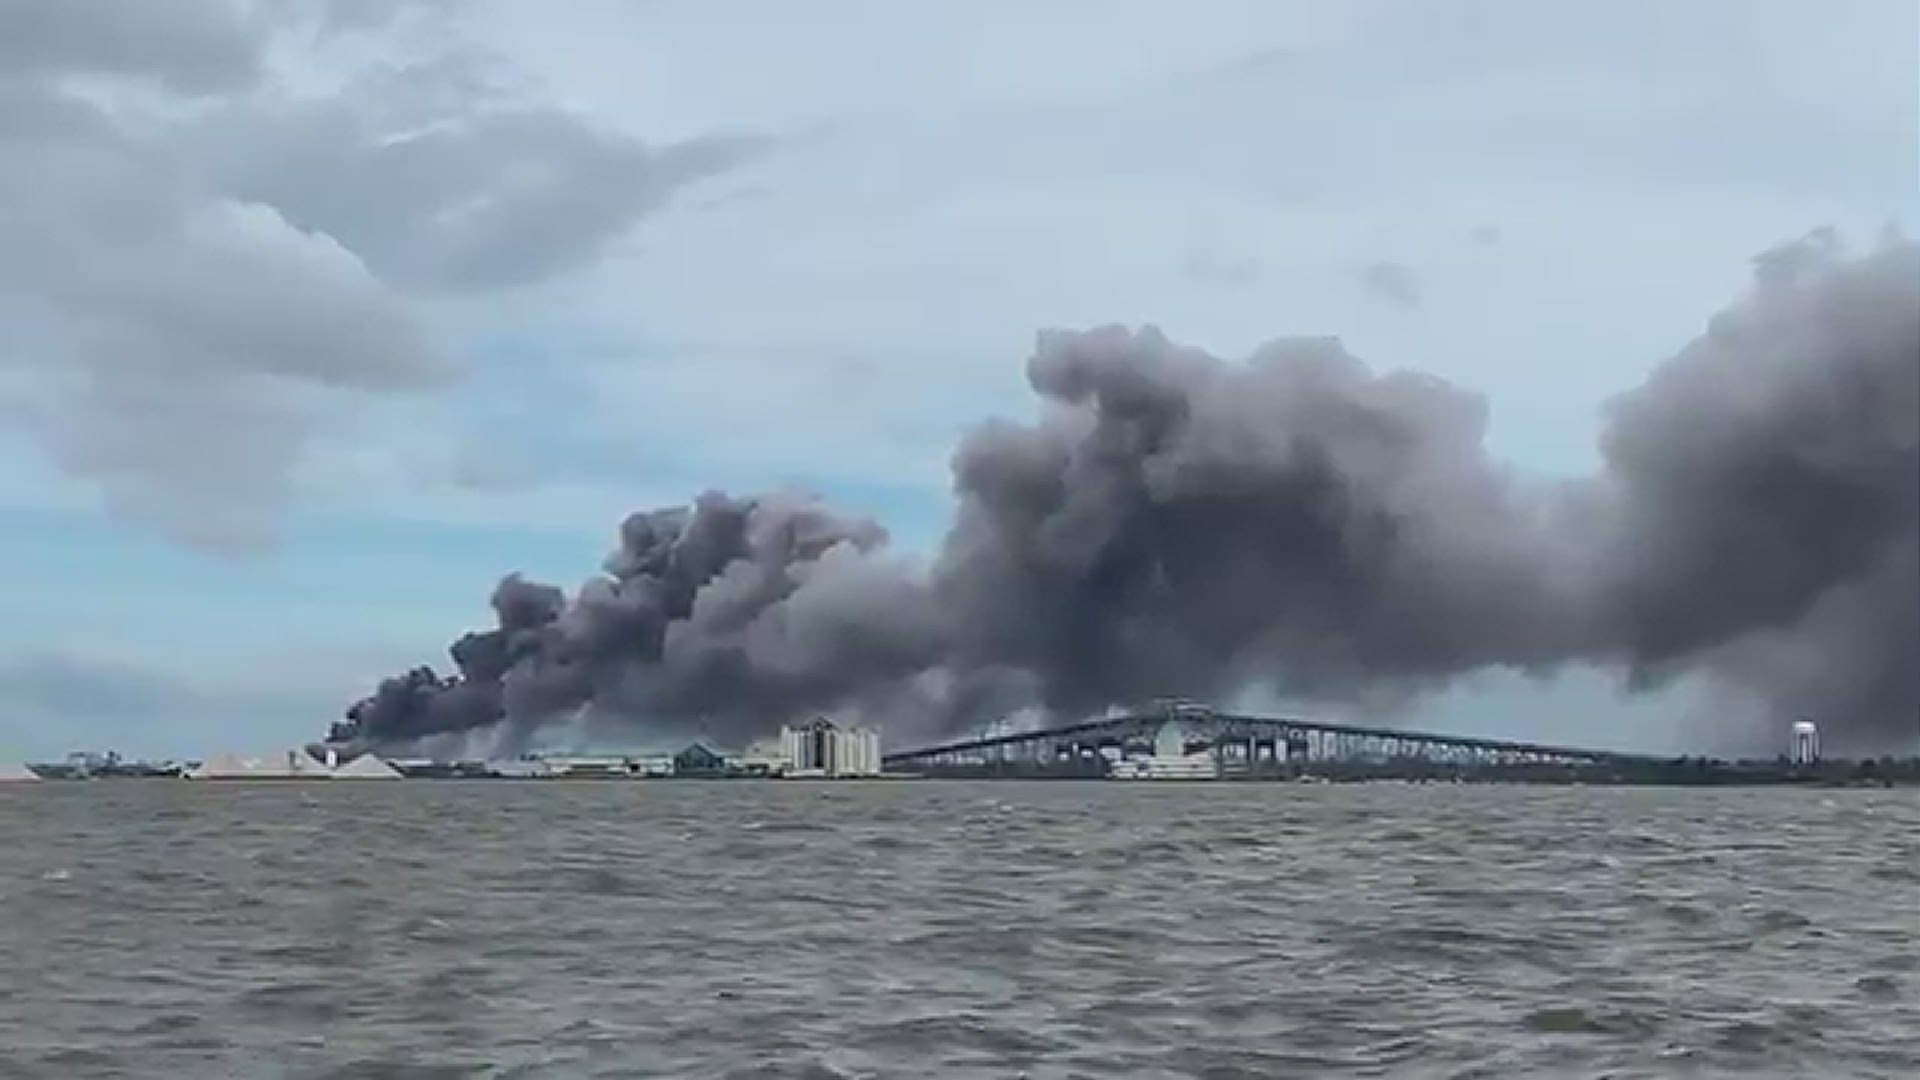 Video of a large chemical fire in Lake Charles in the aftermath of Hurricane Laura. Video courtesy: Greg Nordstrom.